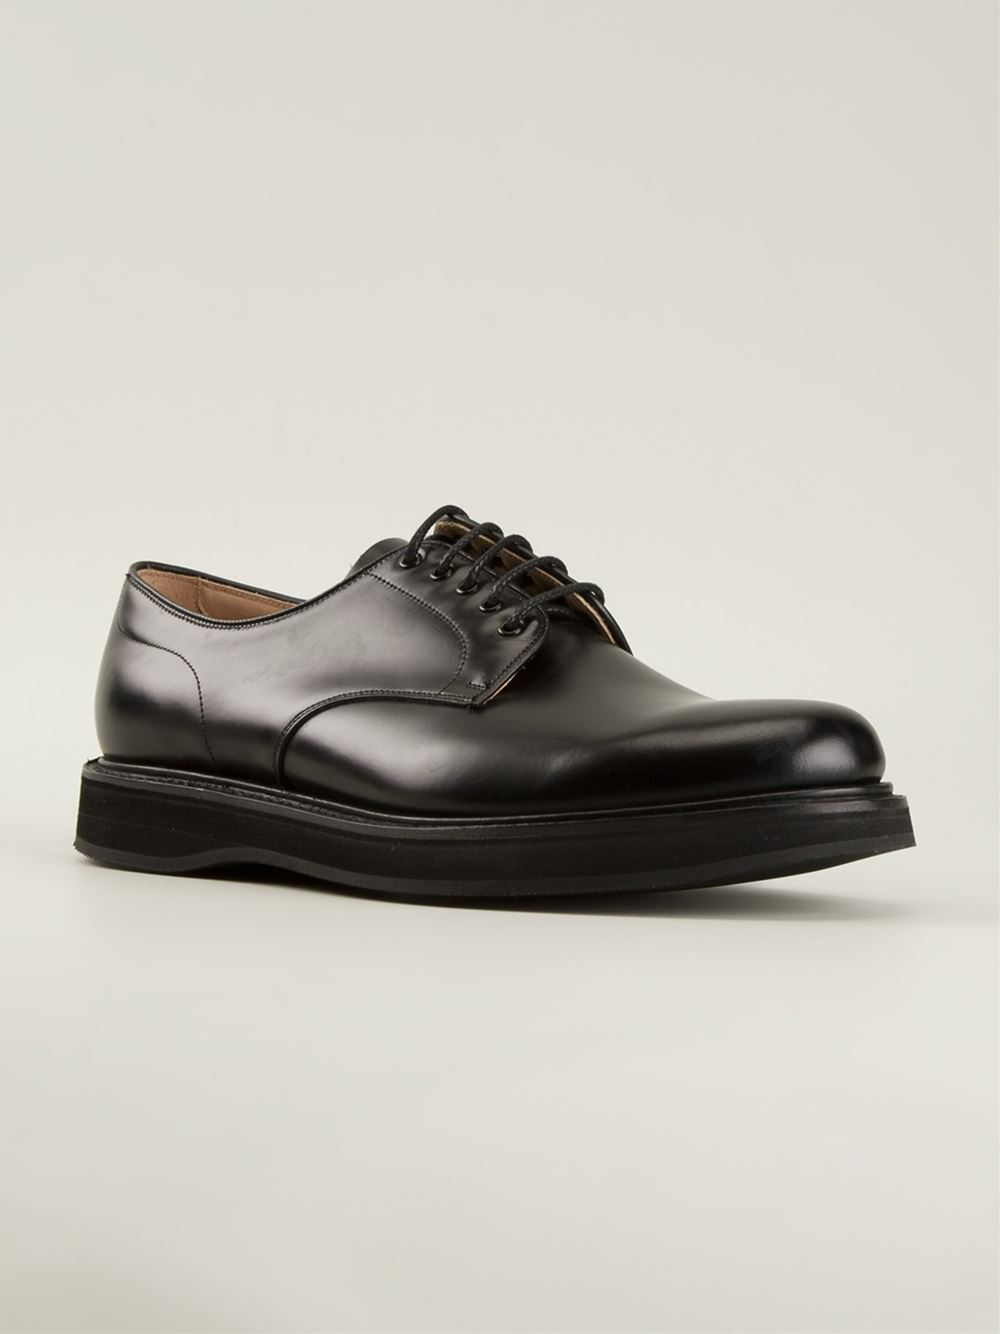 Church's Rubber Sole Derby Shoes in Black for Men - Lyst